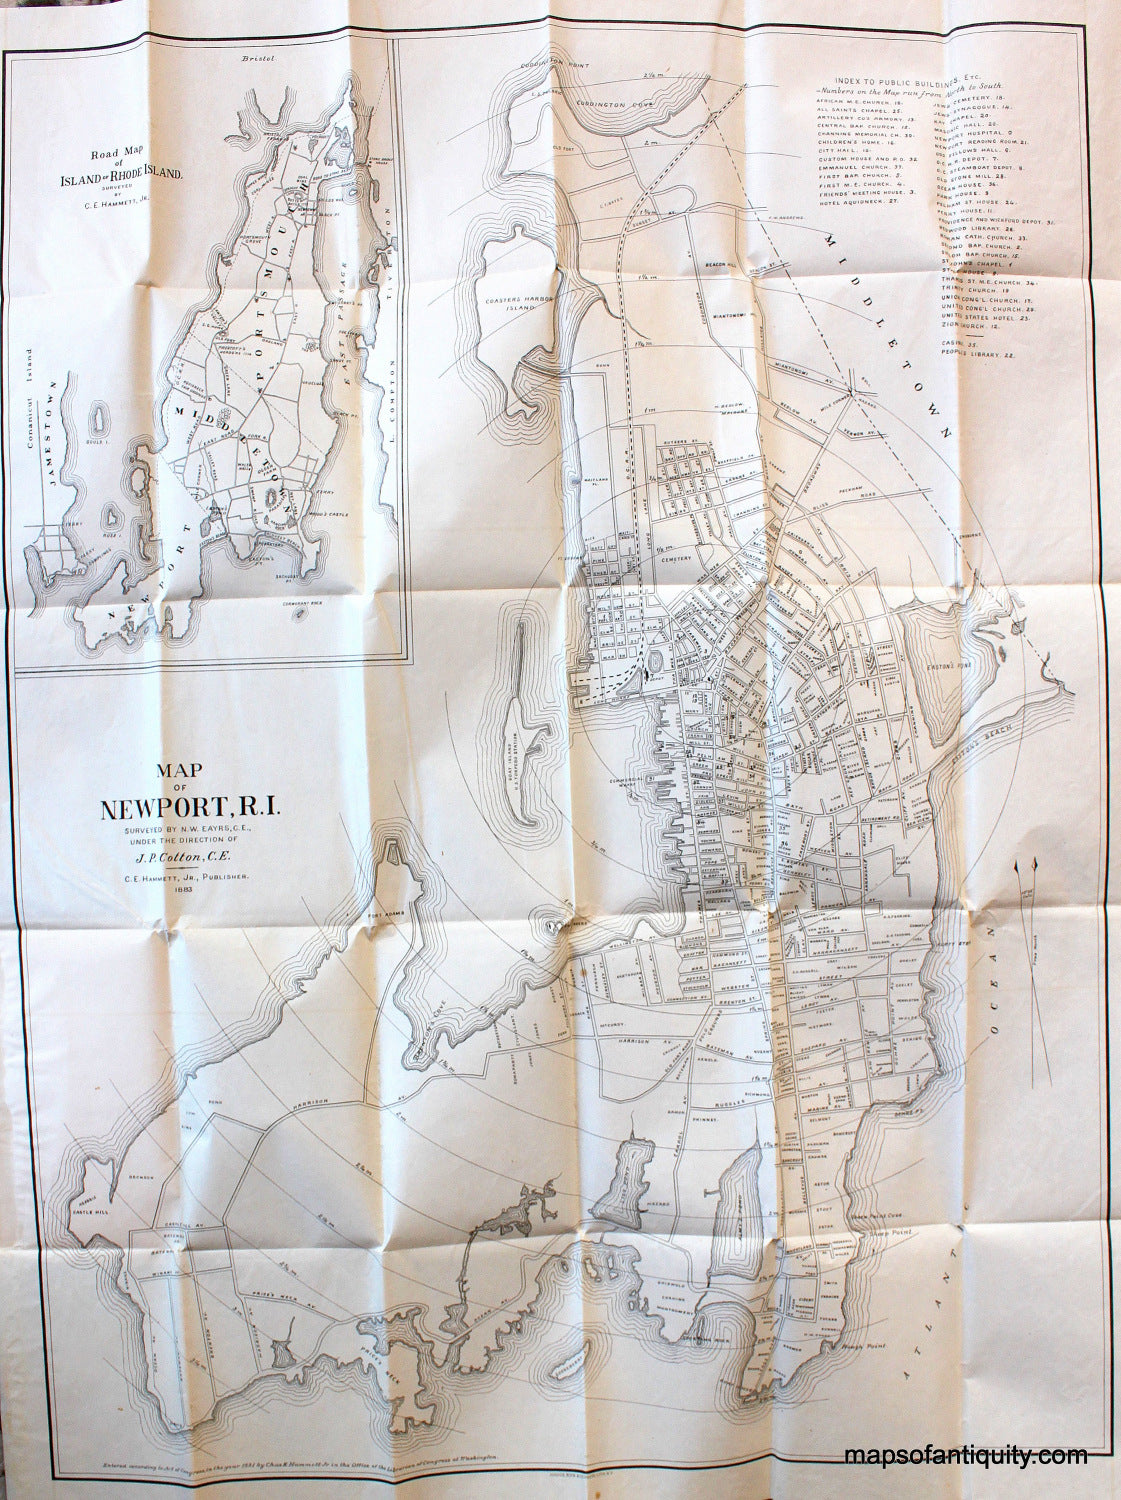 Black-and-White-Antique-Folding-Pocket-Map-with-cover-Pocket-Map-of-the-City-of-Newport-and-Road-Map-of-the-Island-of-Rhode-Island-with-table-of-Distances-Heights-of-Land-Street-Index-and-Short-Trip-Guide-to-Newport..-**********-Towns-and-Cities-United-States-1883-Eayrs-and-Cotton-for-Hammett-Bien-Maps-Of-Antiquity